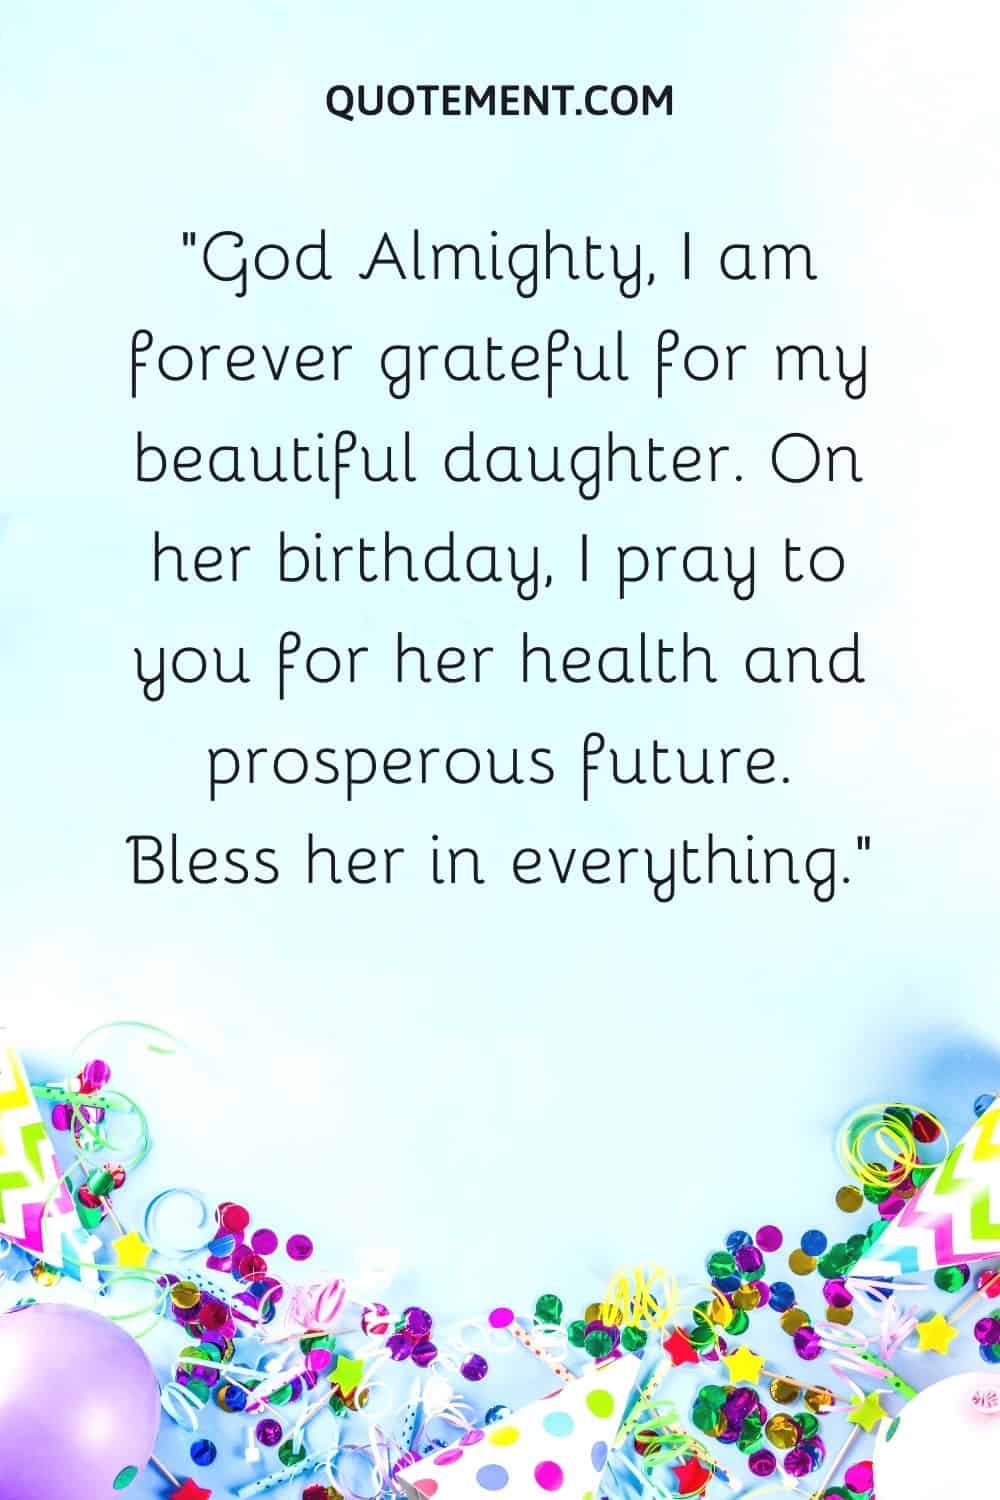 the prayer for my daughter